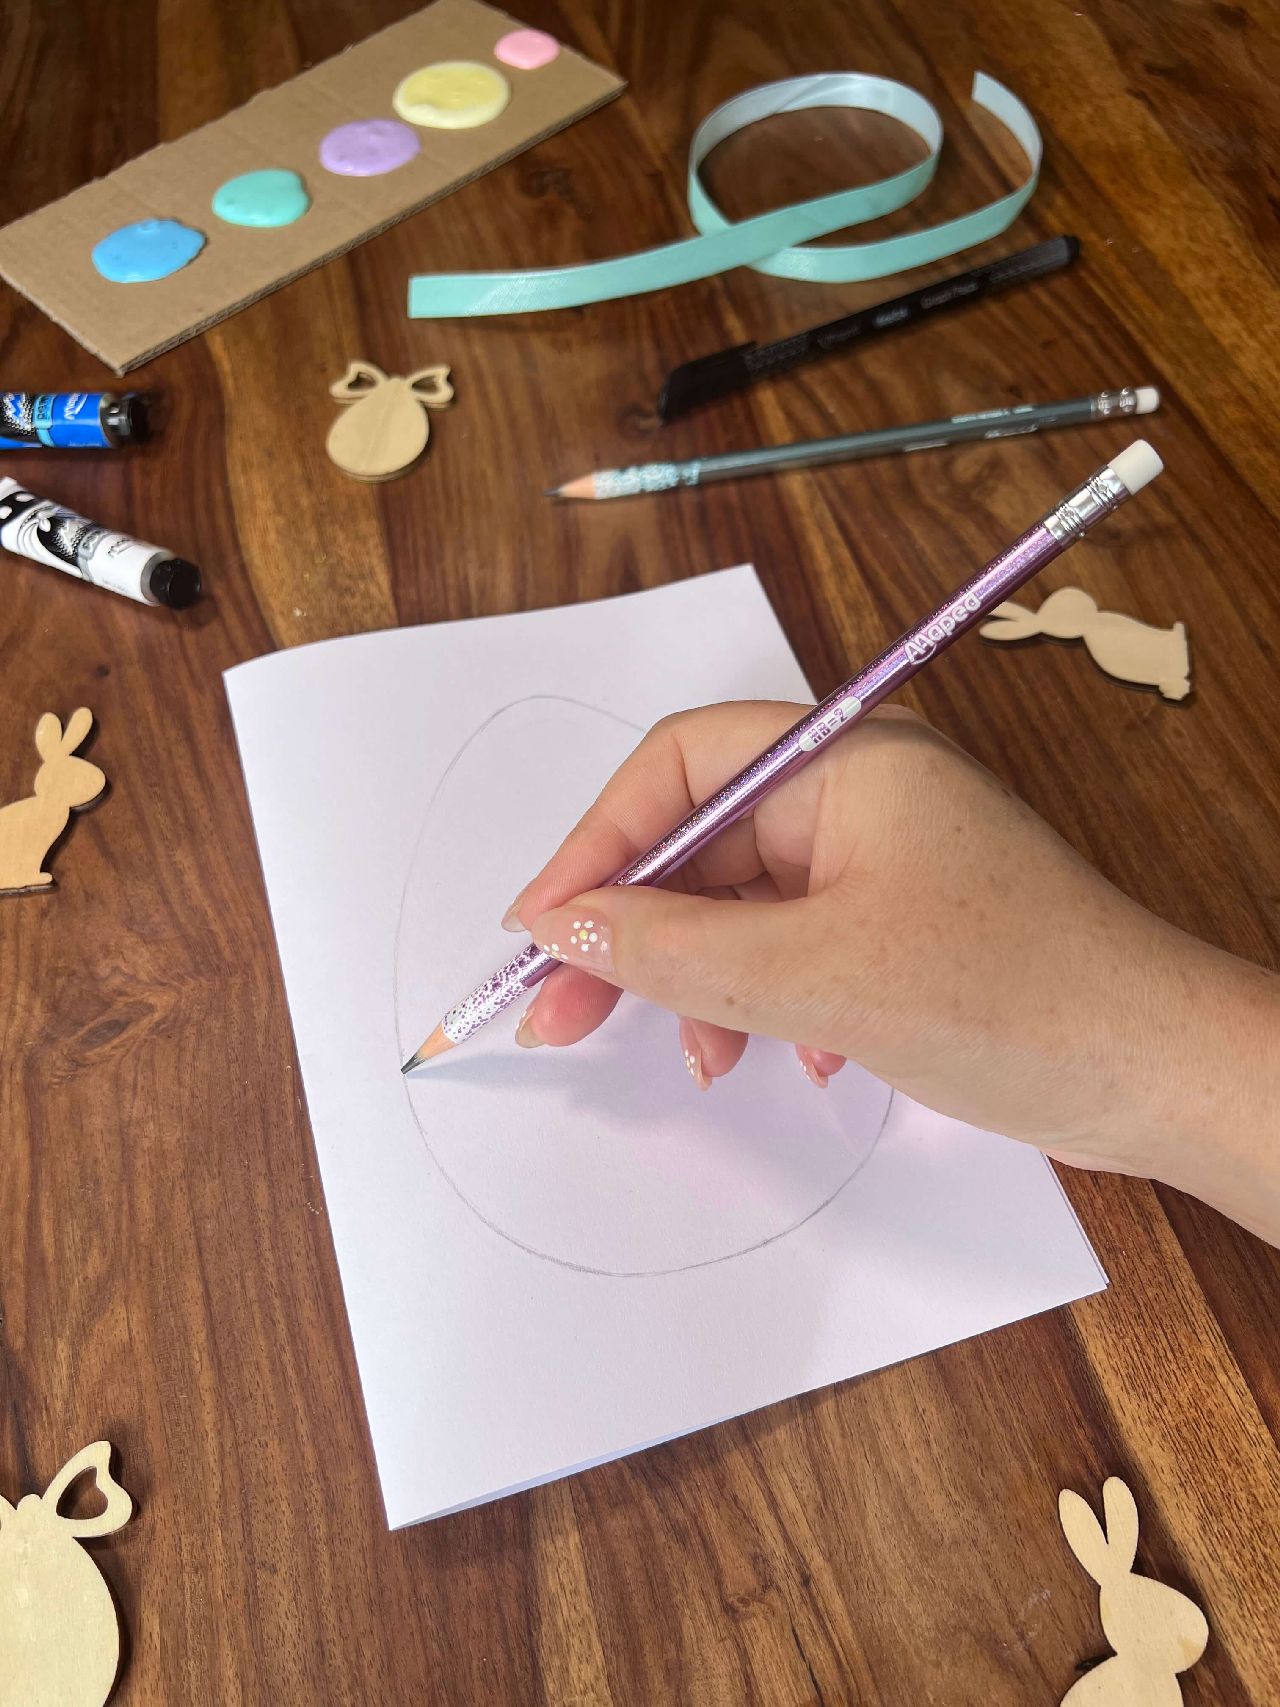 Drawing an egg shape on a piece of paper